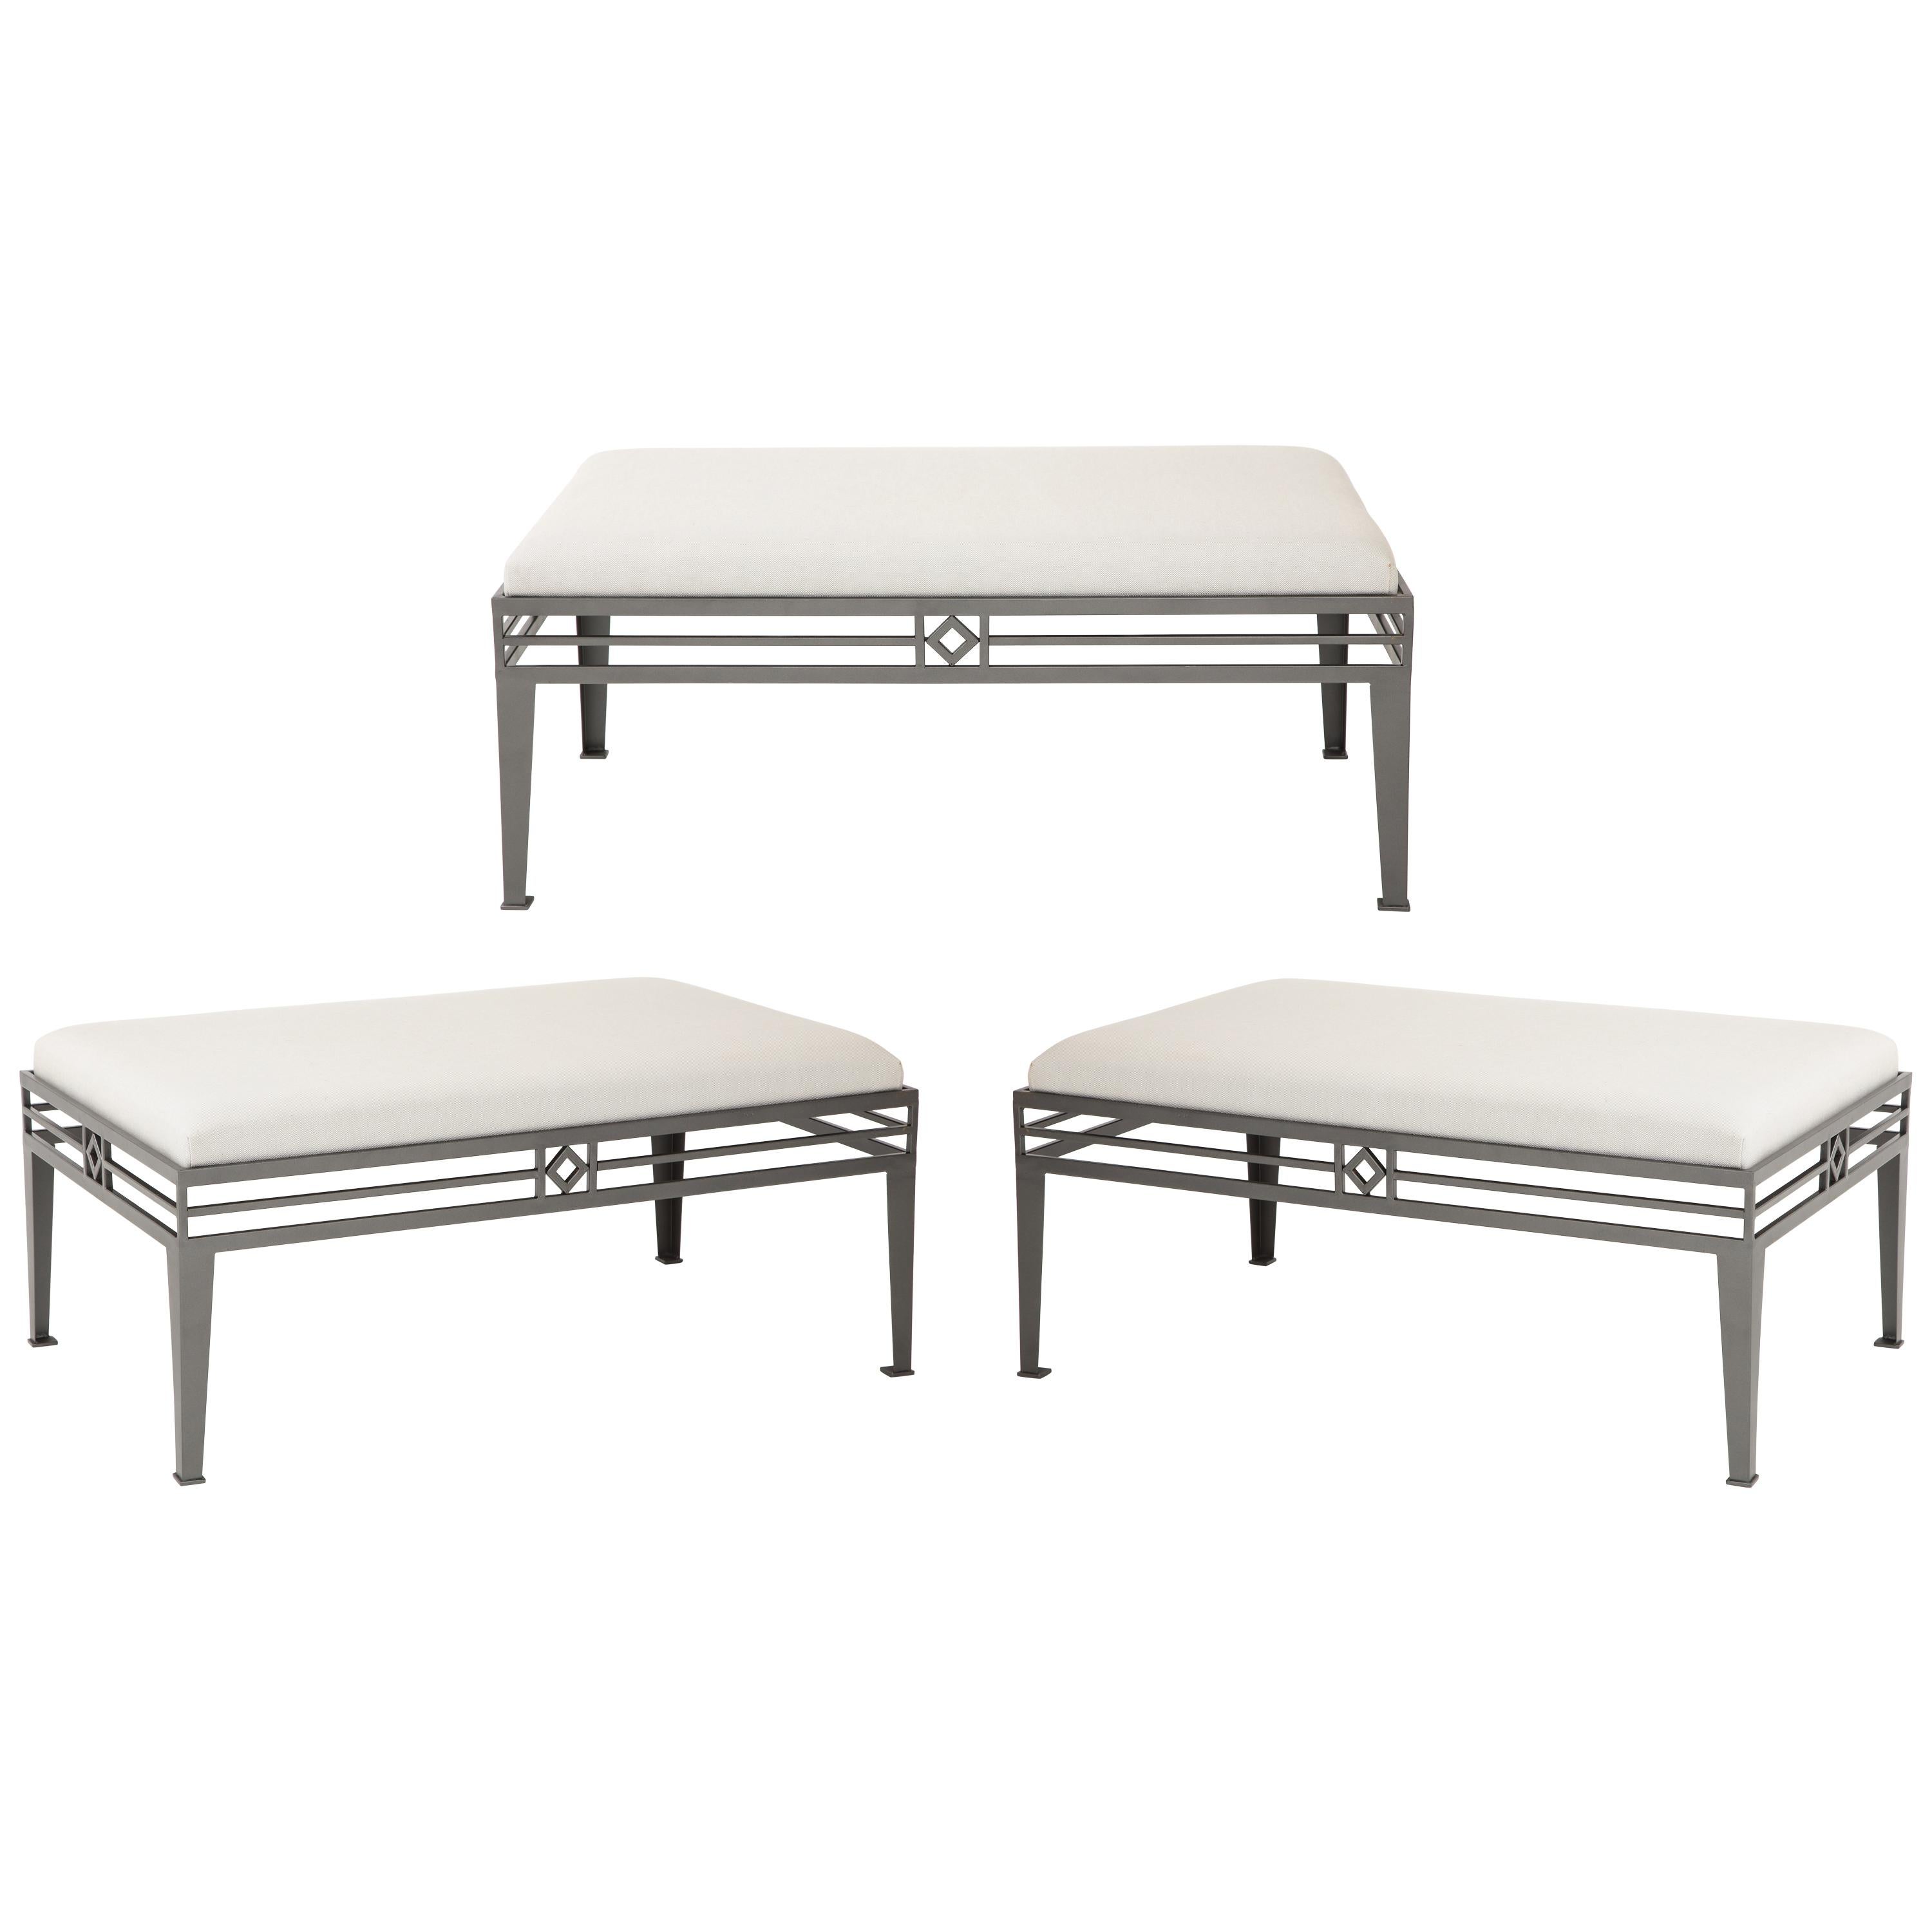 Set of Three Outdoor Benches